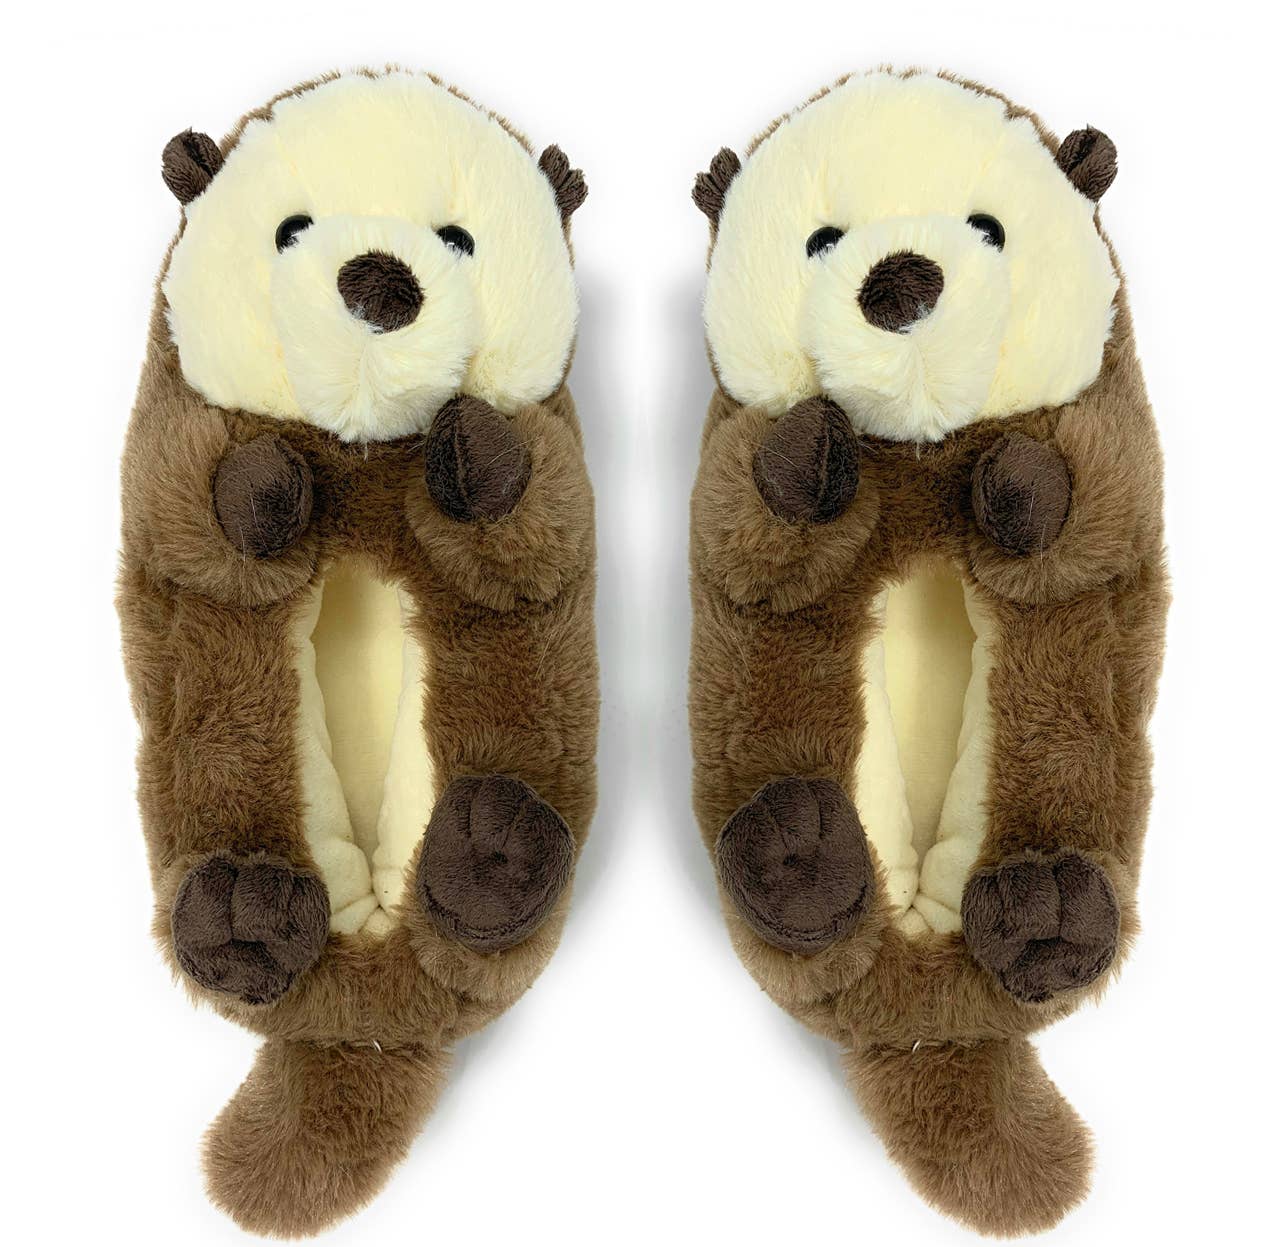 Otter Plush Slippers- CUTEST Fluffy House Slippers COZY